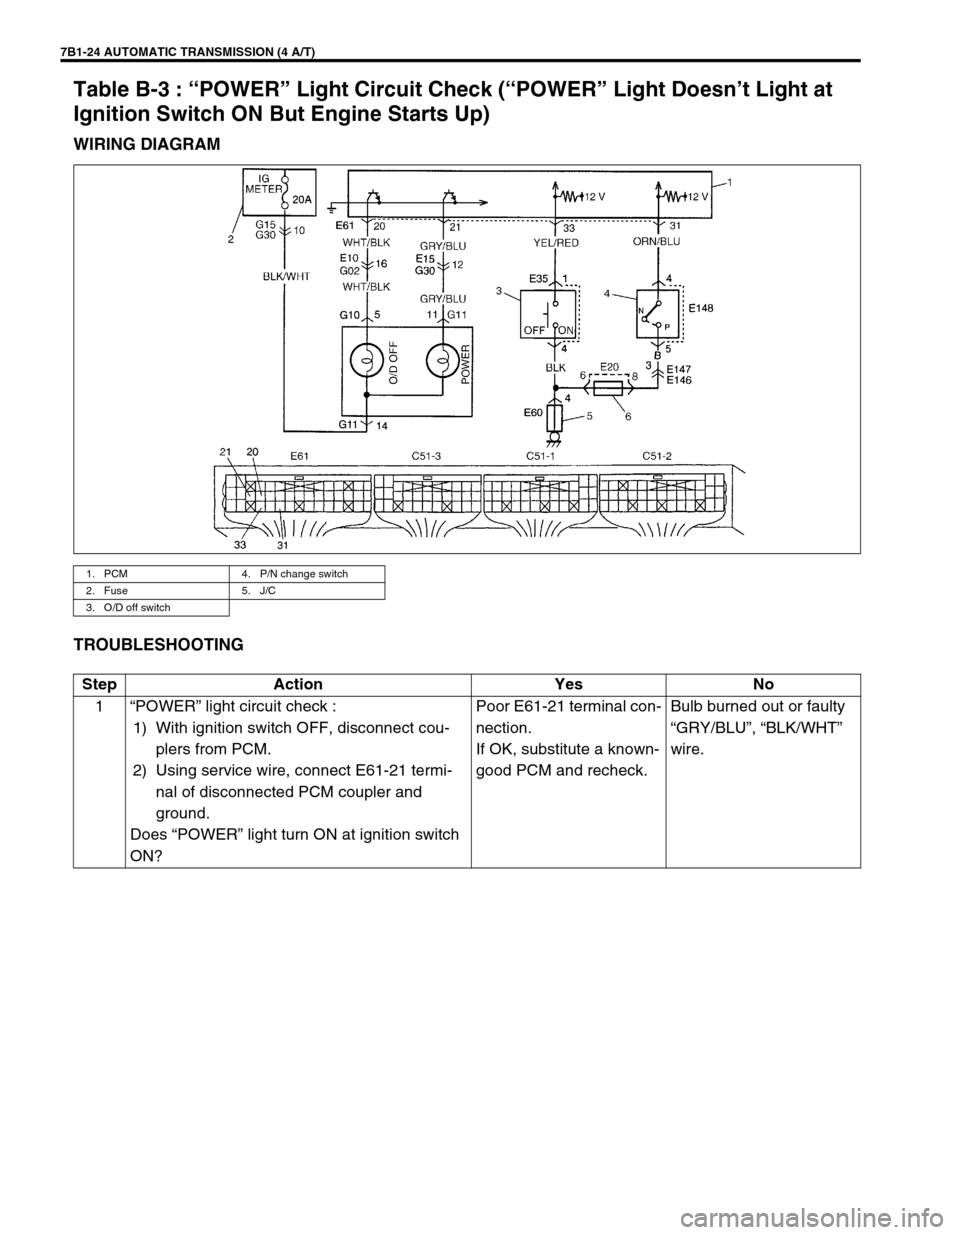 SUZUKI GRAND VITARA 2001 2.G User Guide 7B1-24 AUTOMATIC TRANSMISSION (4 A/T)
Table B-3 : “POWER” Light Circuit Check (“POWER” Light Doesn’t Light at 
Ignition Switch ON But Engine Starts Up)
WIRING DIAGRAM
TROUBLESHOOTING
1. PCM 